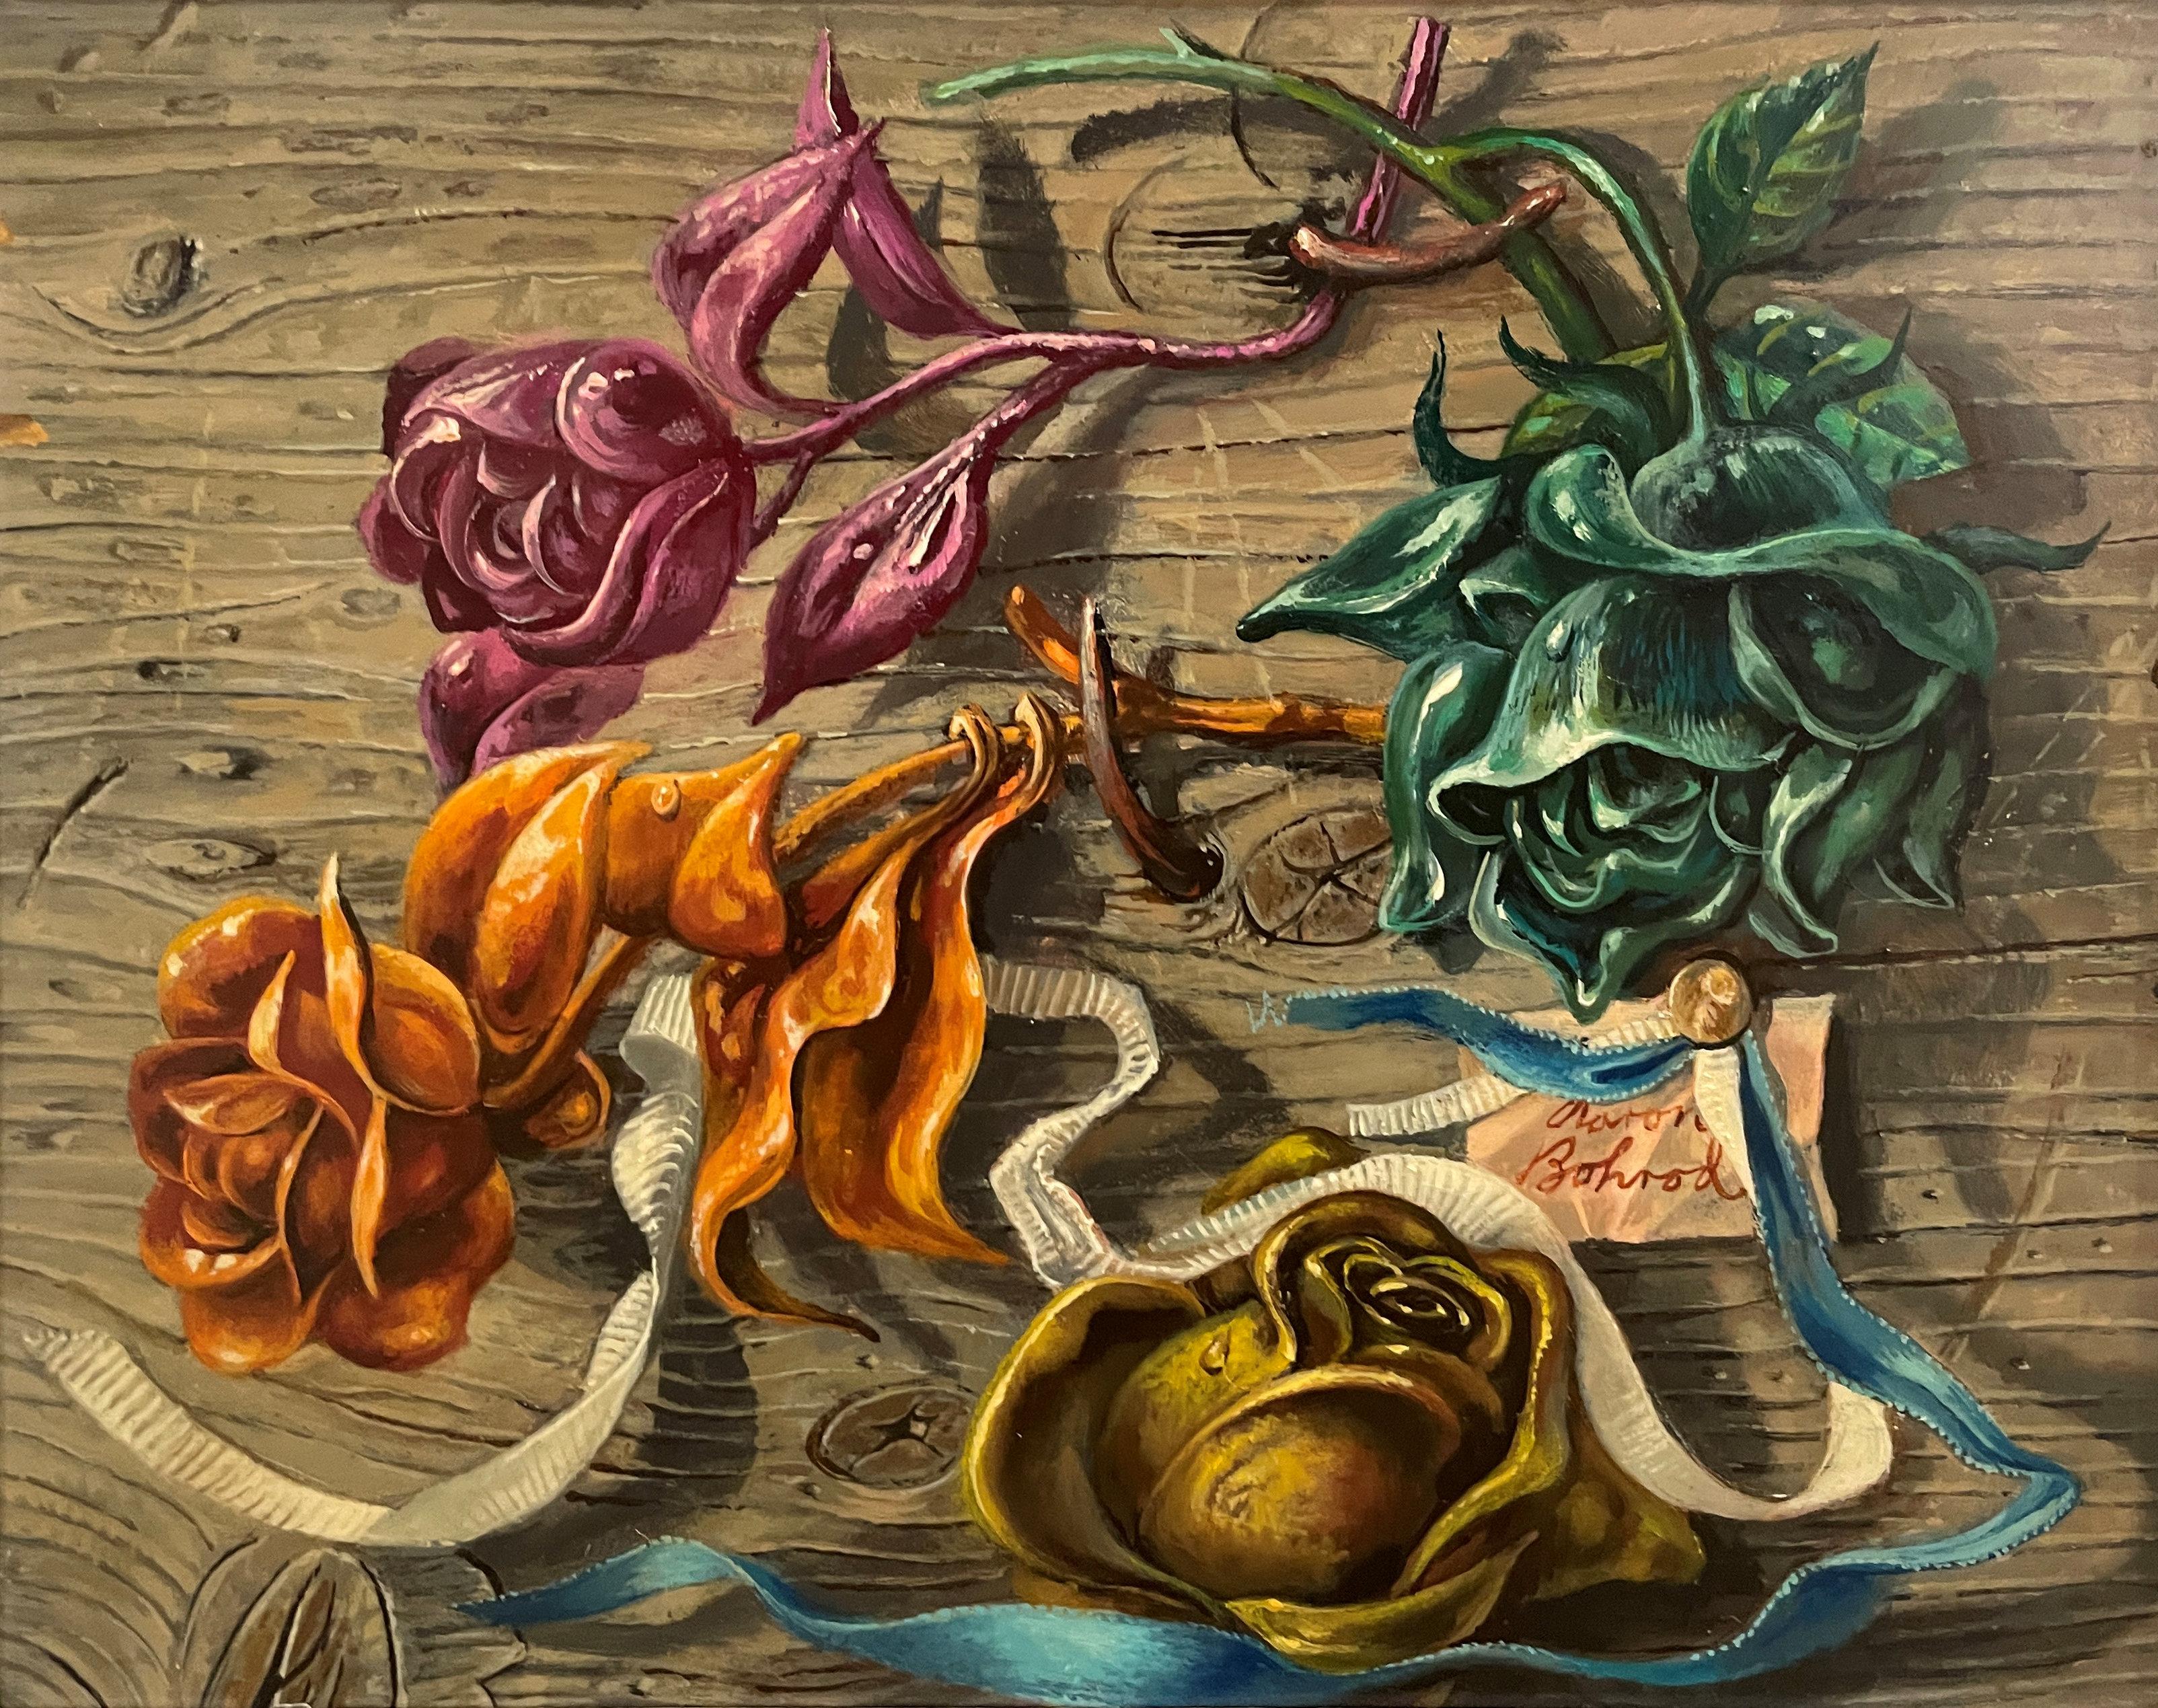 "Roses are Red" Aaron Bohrod, Pun Humor, Magic Realism, Colorful Flowers